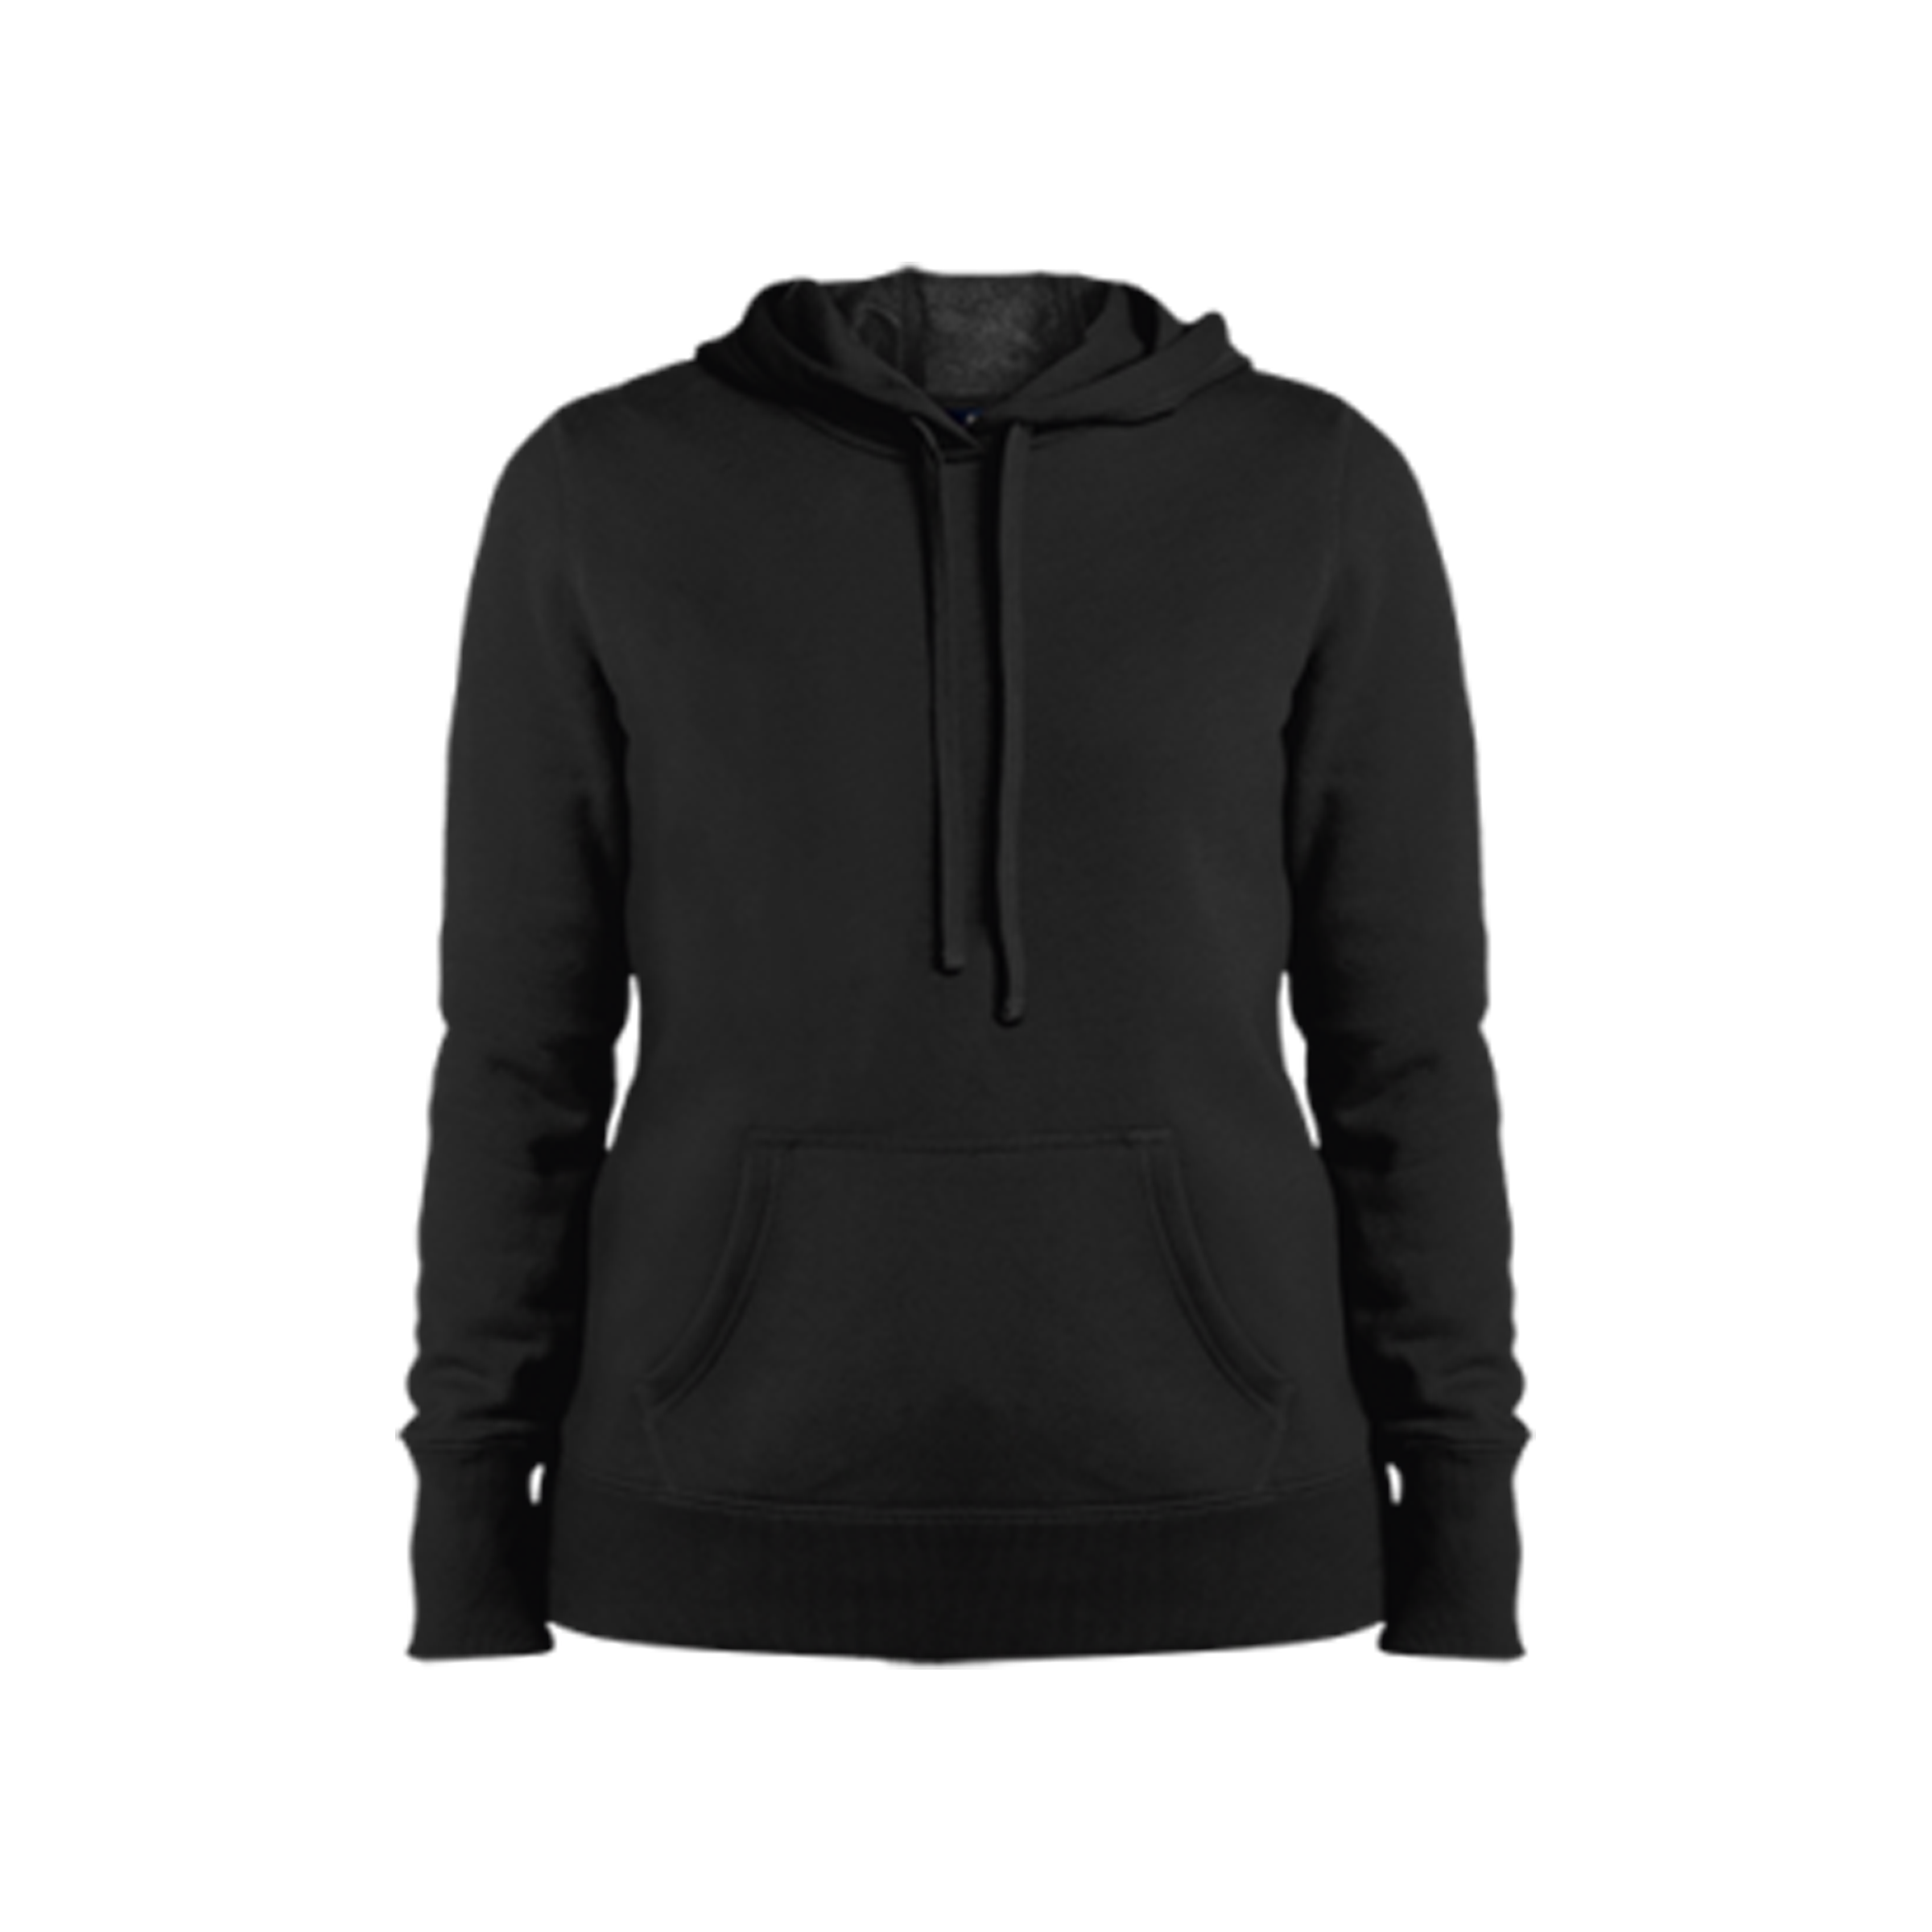 https://humanitysource.org/wp-content/uploads/2019/11/hoodie.png